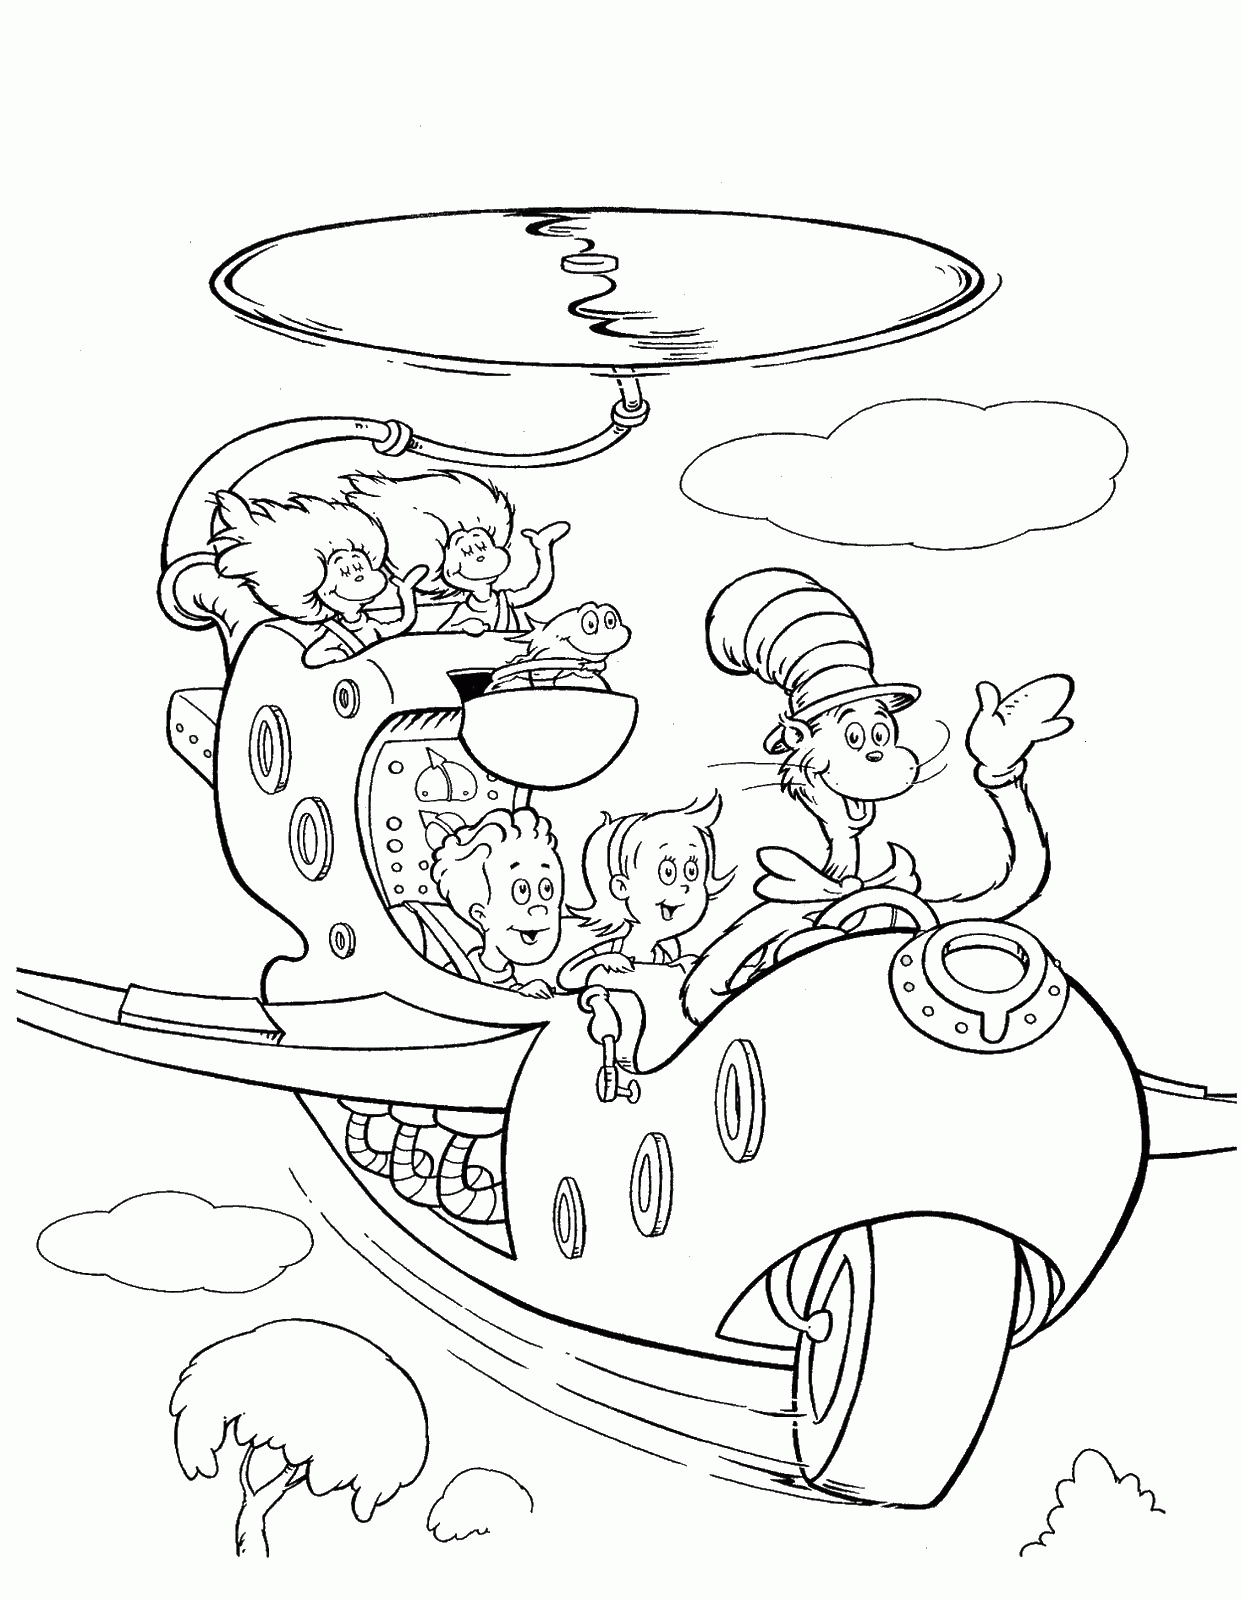 Cat In The Hat Coloring Pages Free Printable - Coloring Home - Free Printable Cat In The Hat Pictures